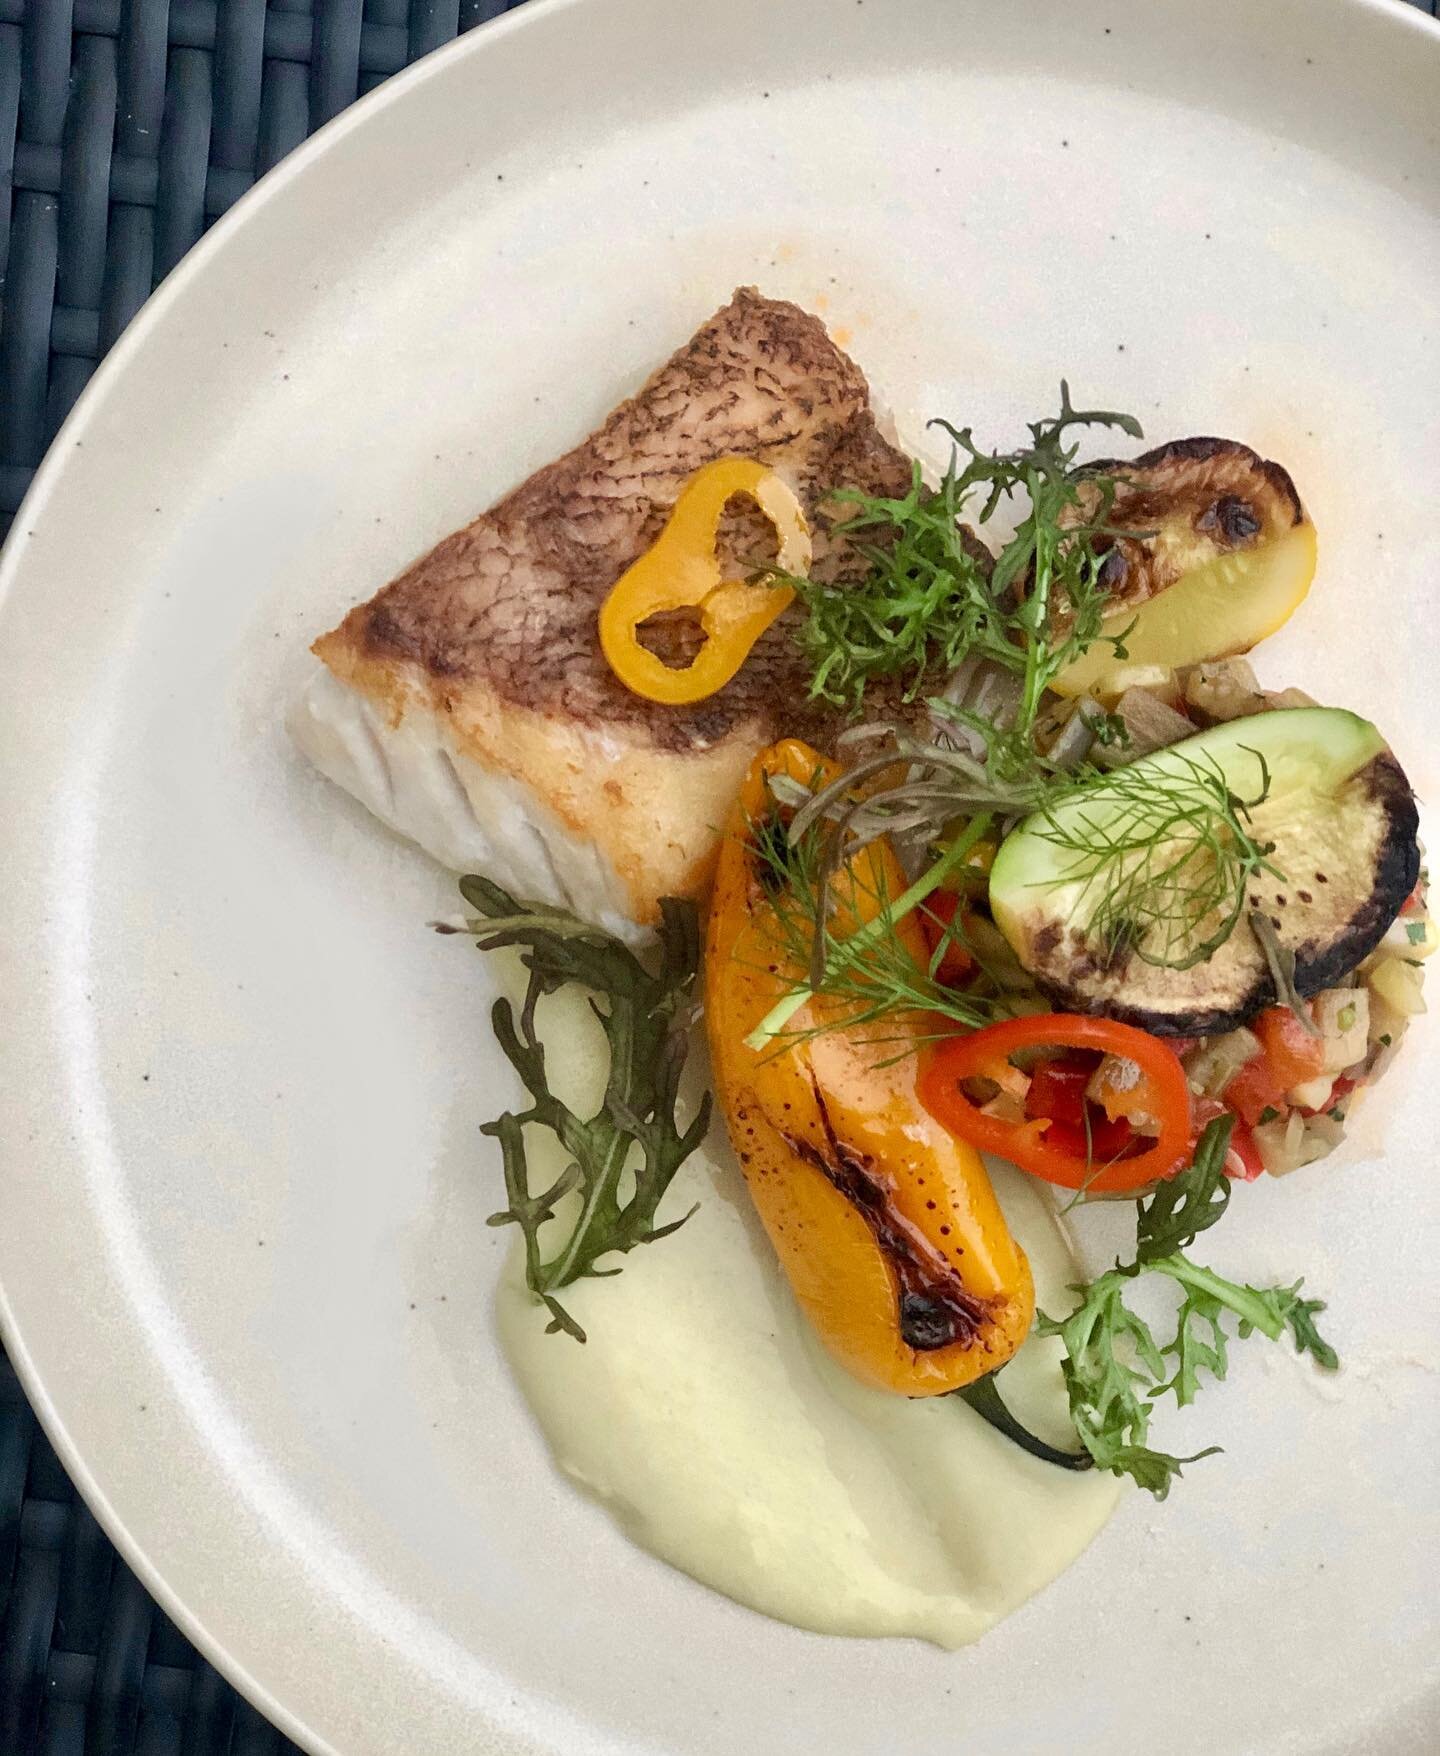 We love living by the coast and getting to use local fresh products. This beautiful White Sea Bass from Baja is accompanied with a corn bisque, roasted farmers marker squash, and pickled peppers under a bed of ratatouille.
.
.
.
.
.
#chefandthehost  